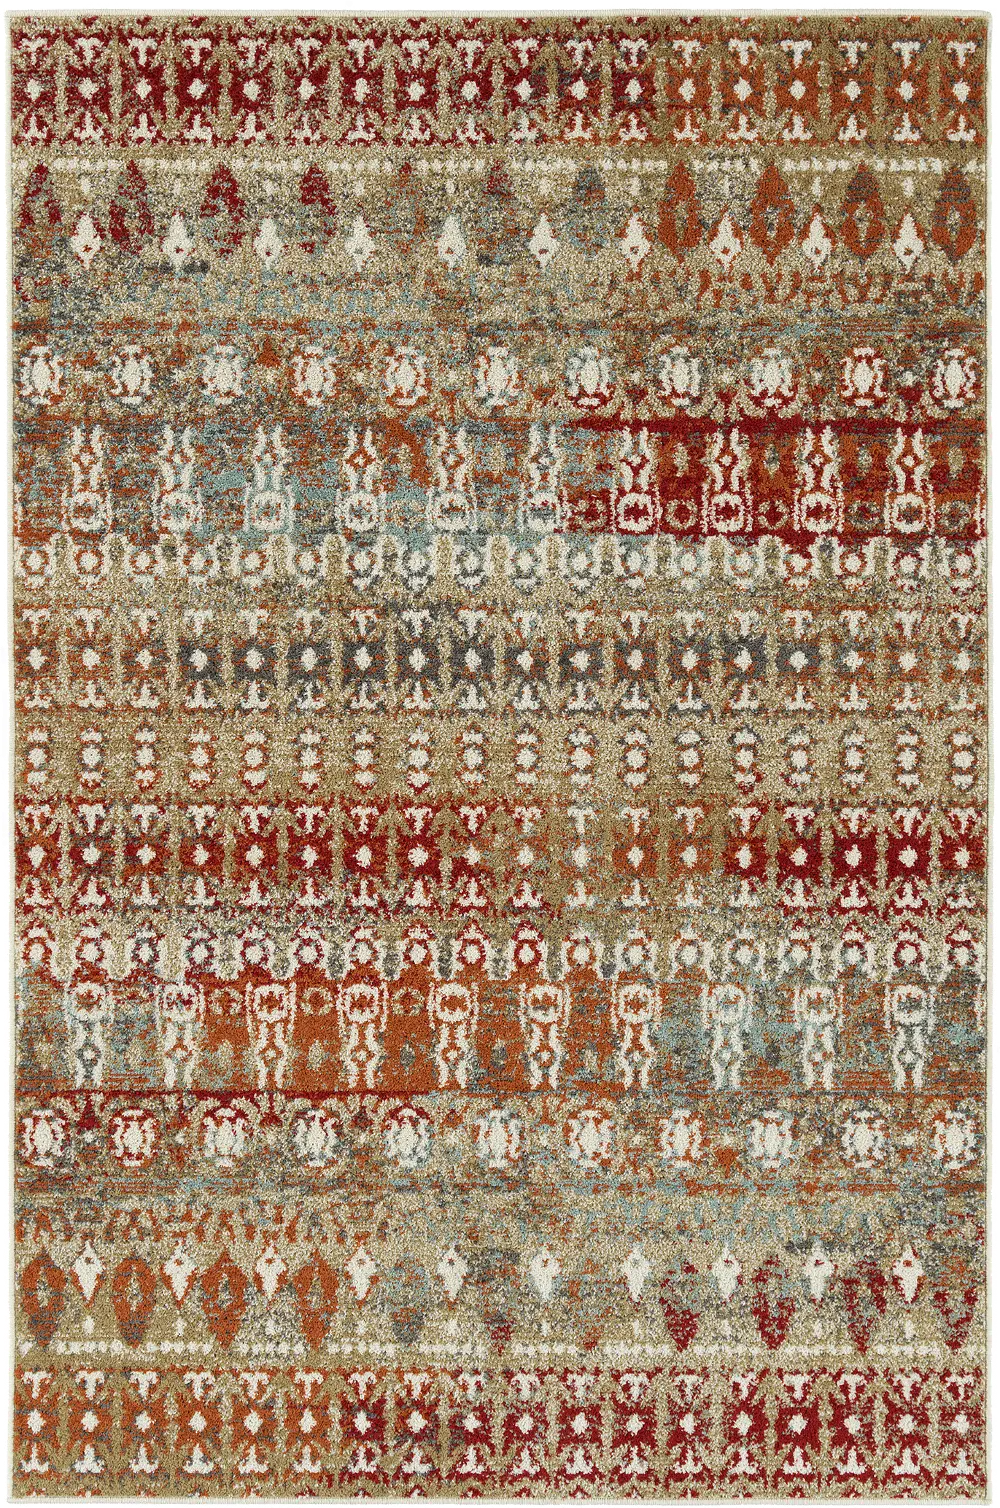 5 x 8 Medium Gold and Red Area Rug - Kavon-1